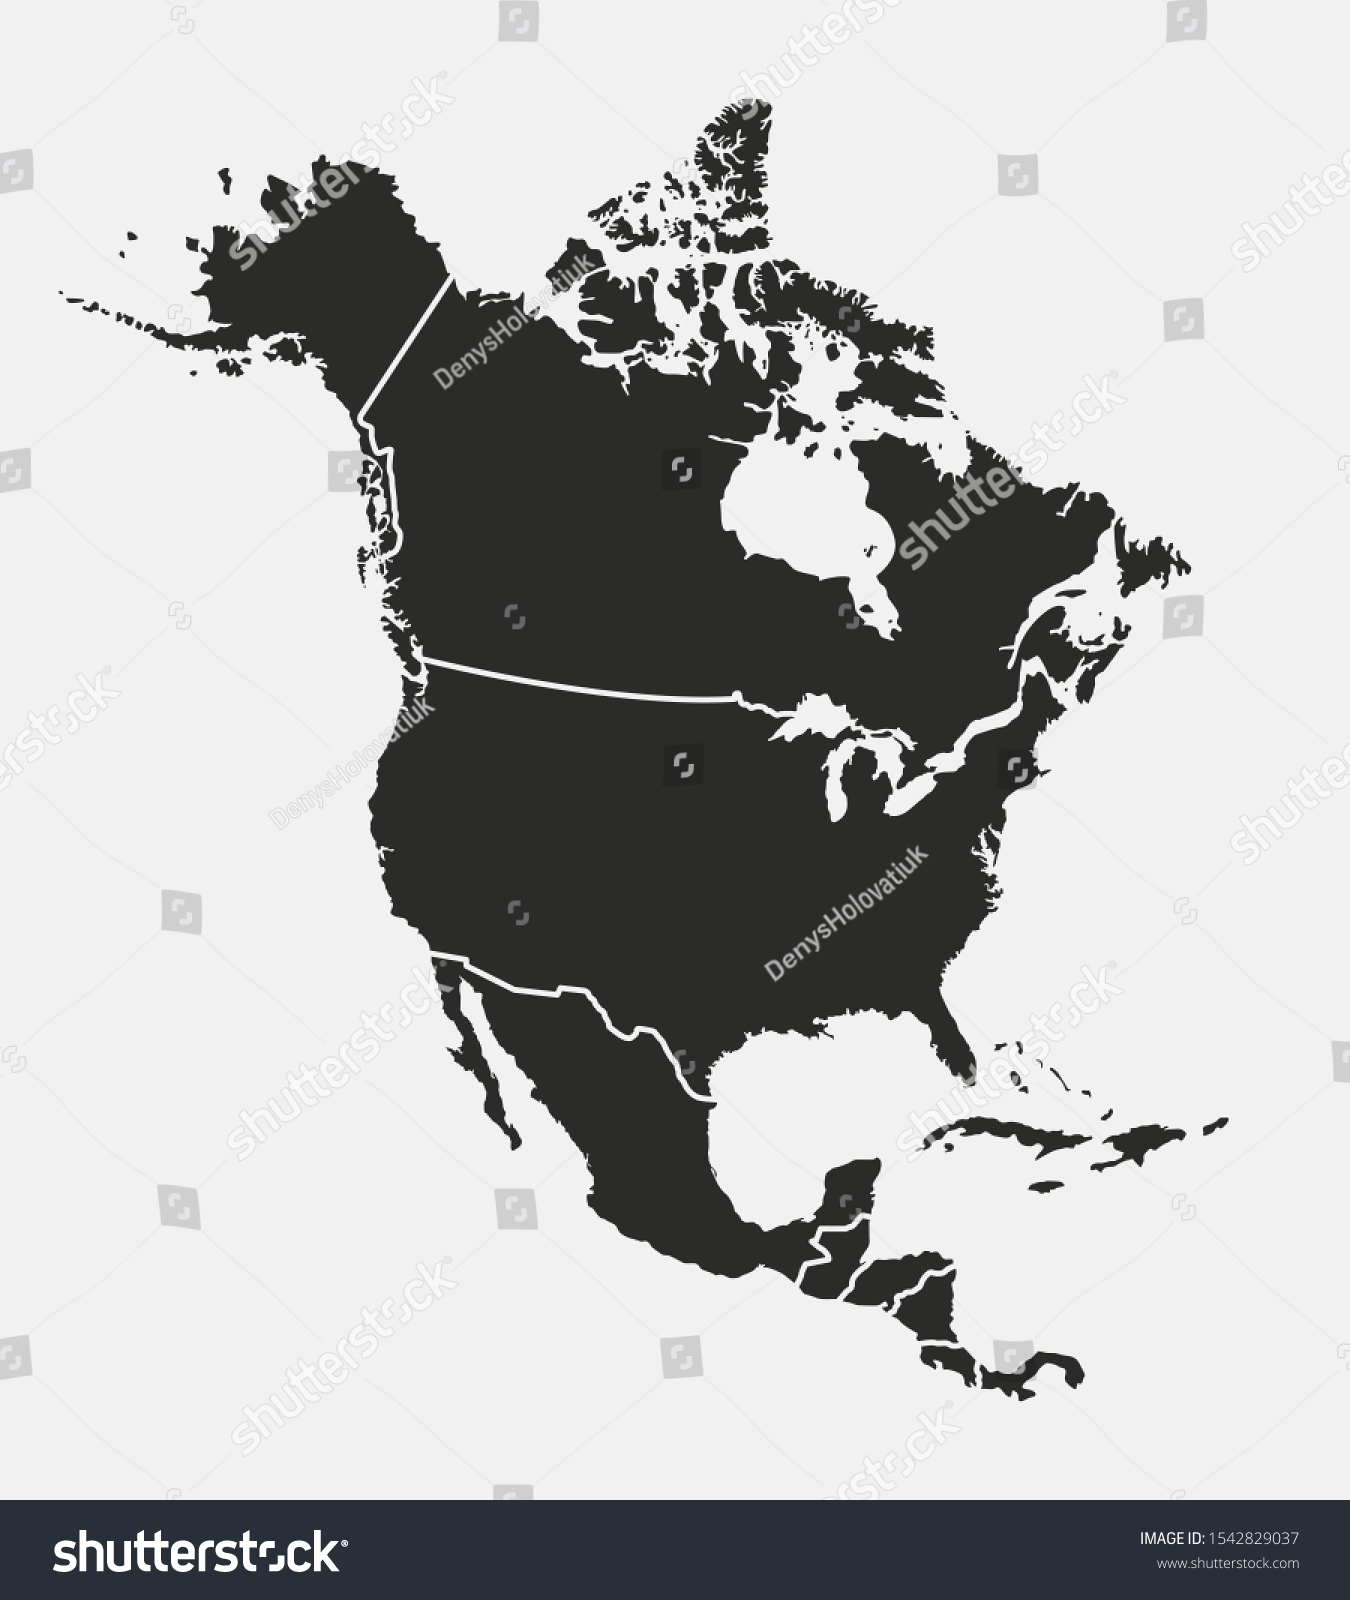 North America map with regions. USA, Canada, Mexico maps. Outline North America map isolated on white background. Vector illustration #1542829037